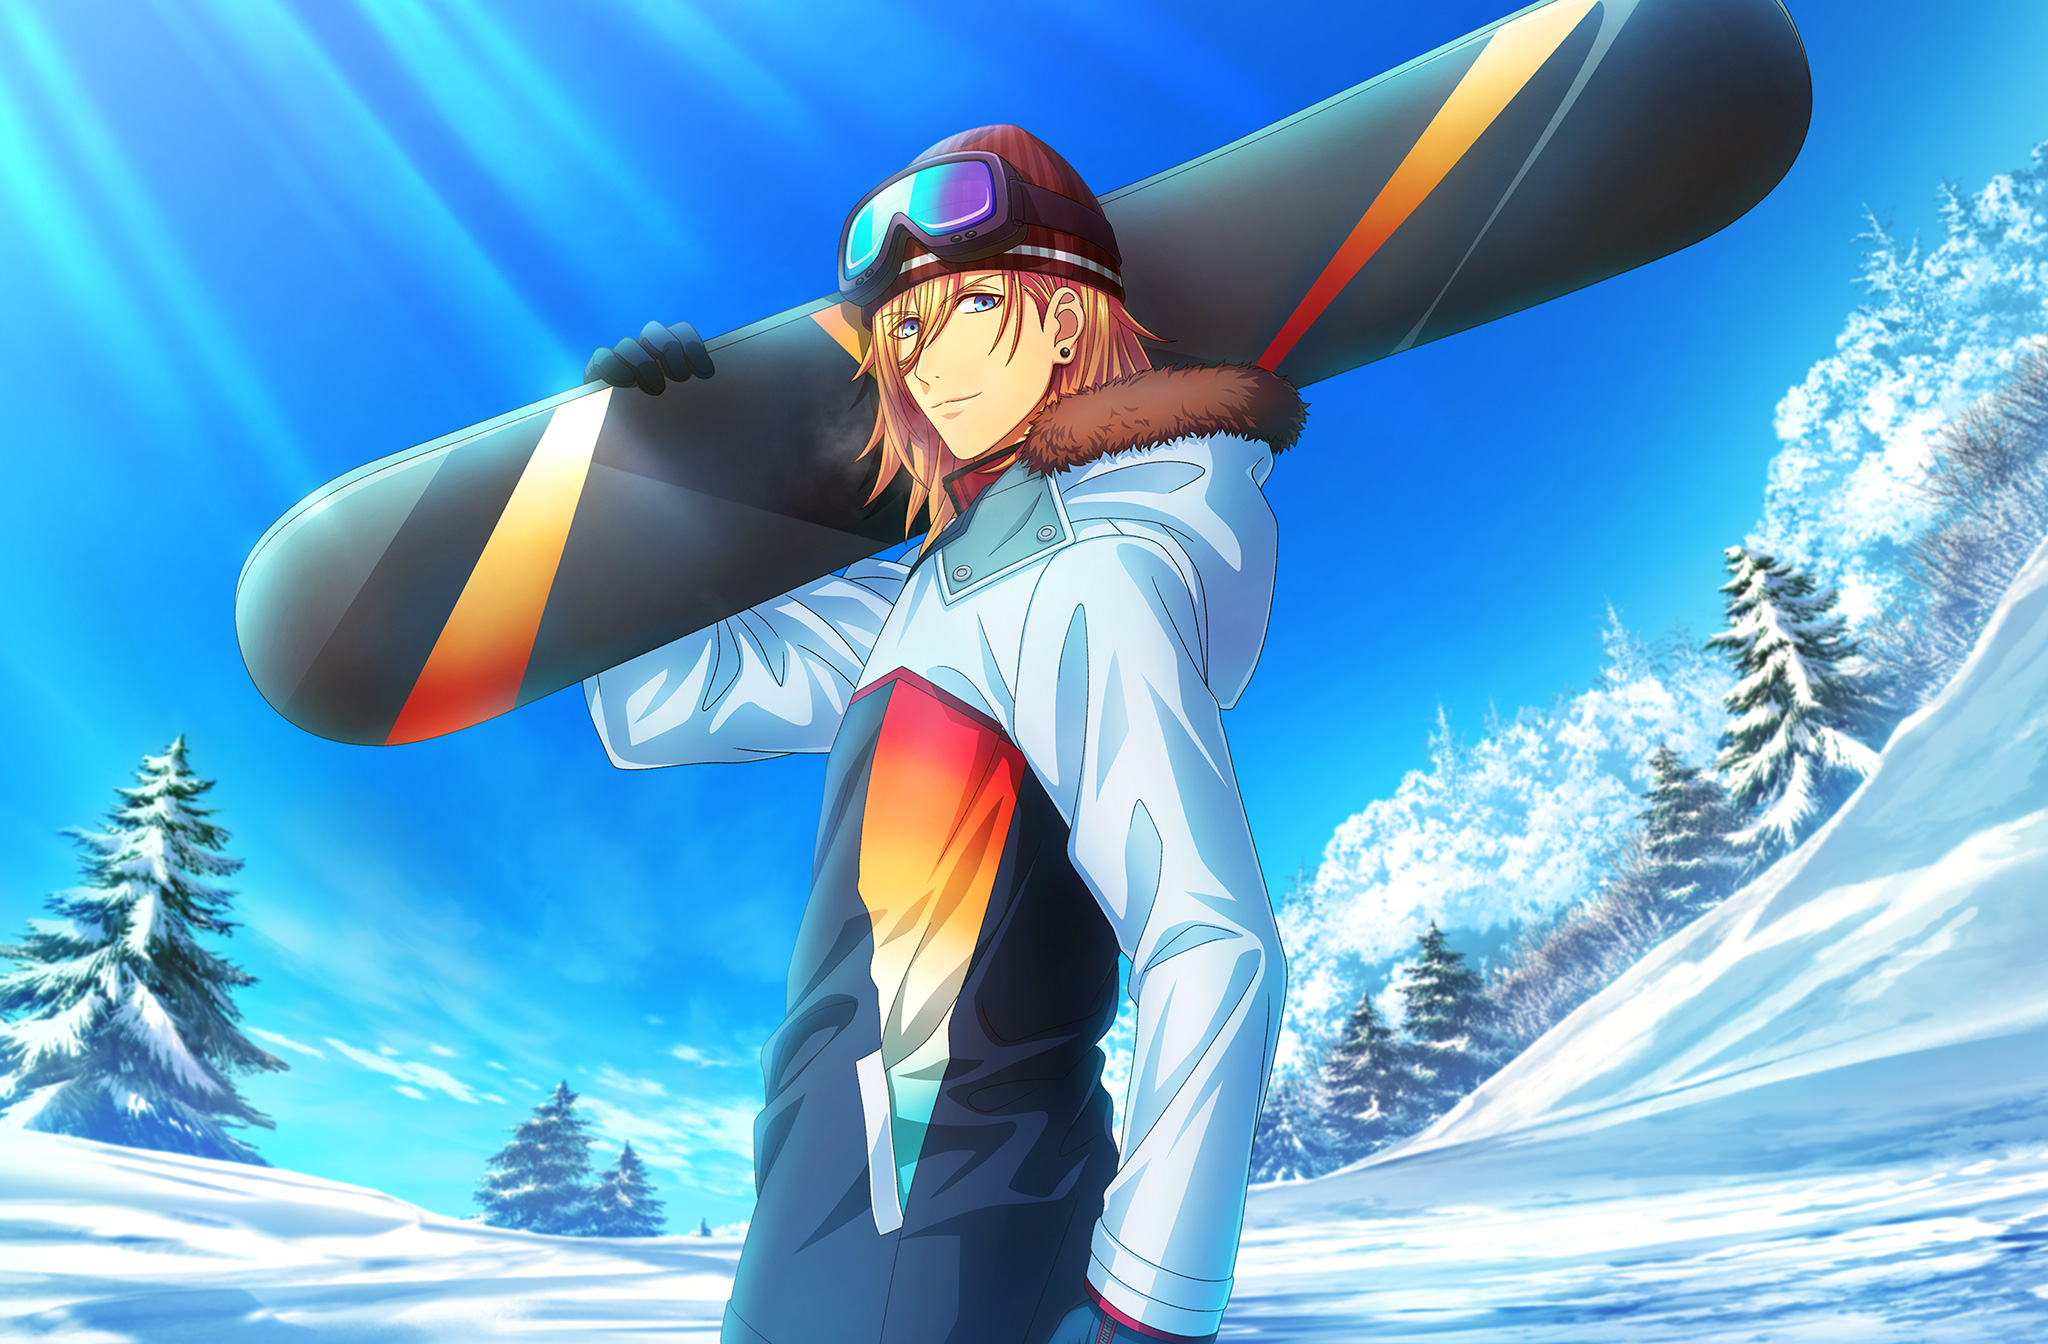 Snowboarding Anime Chick Getting Air